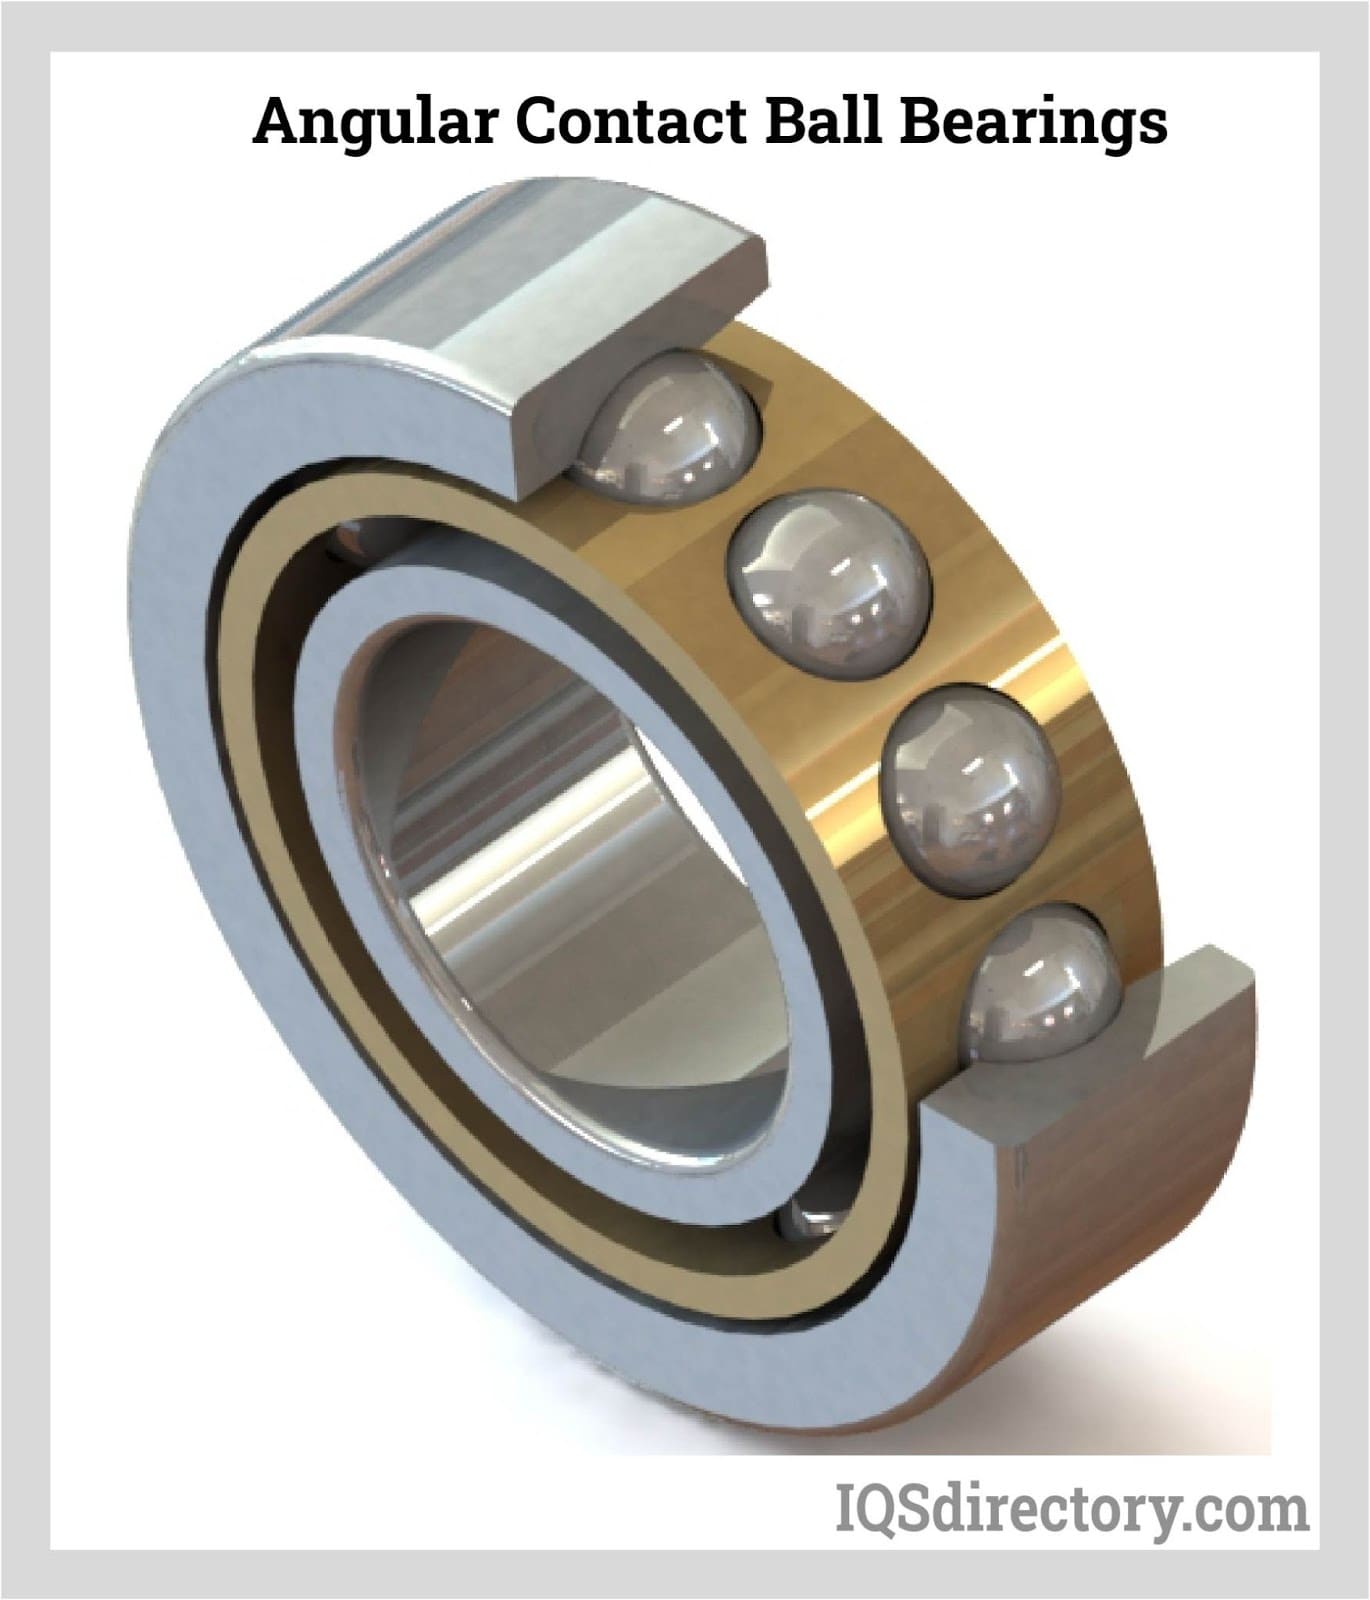 Ball Bearings: Types, Design, Function, and Benefits